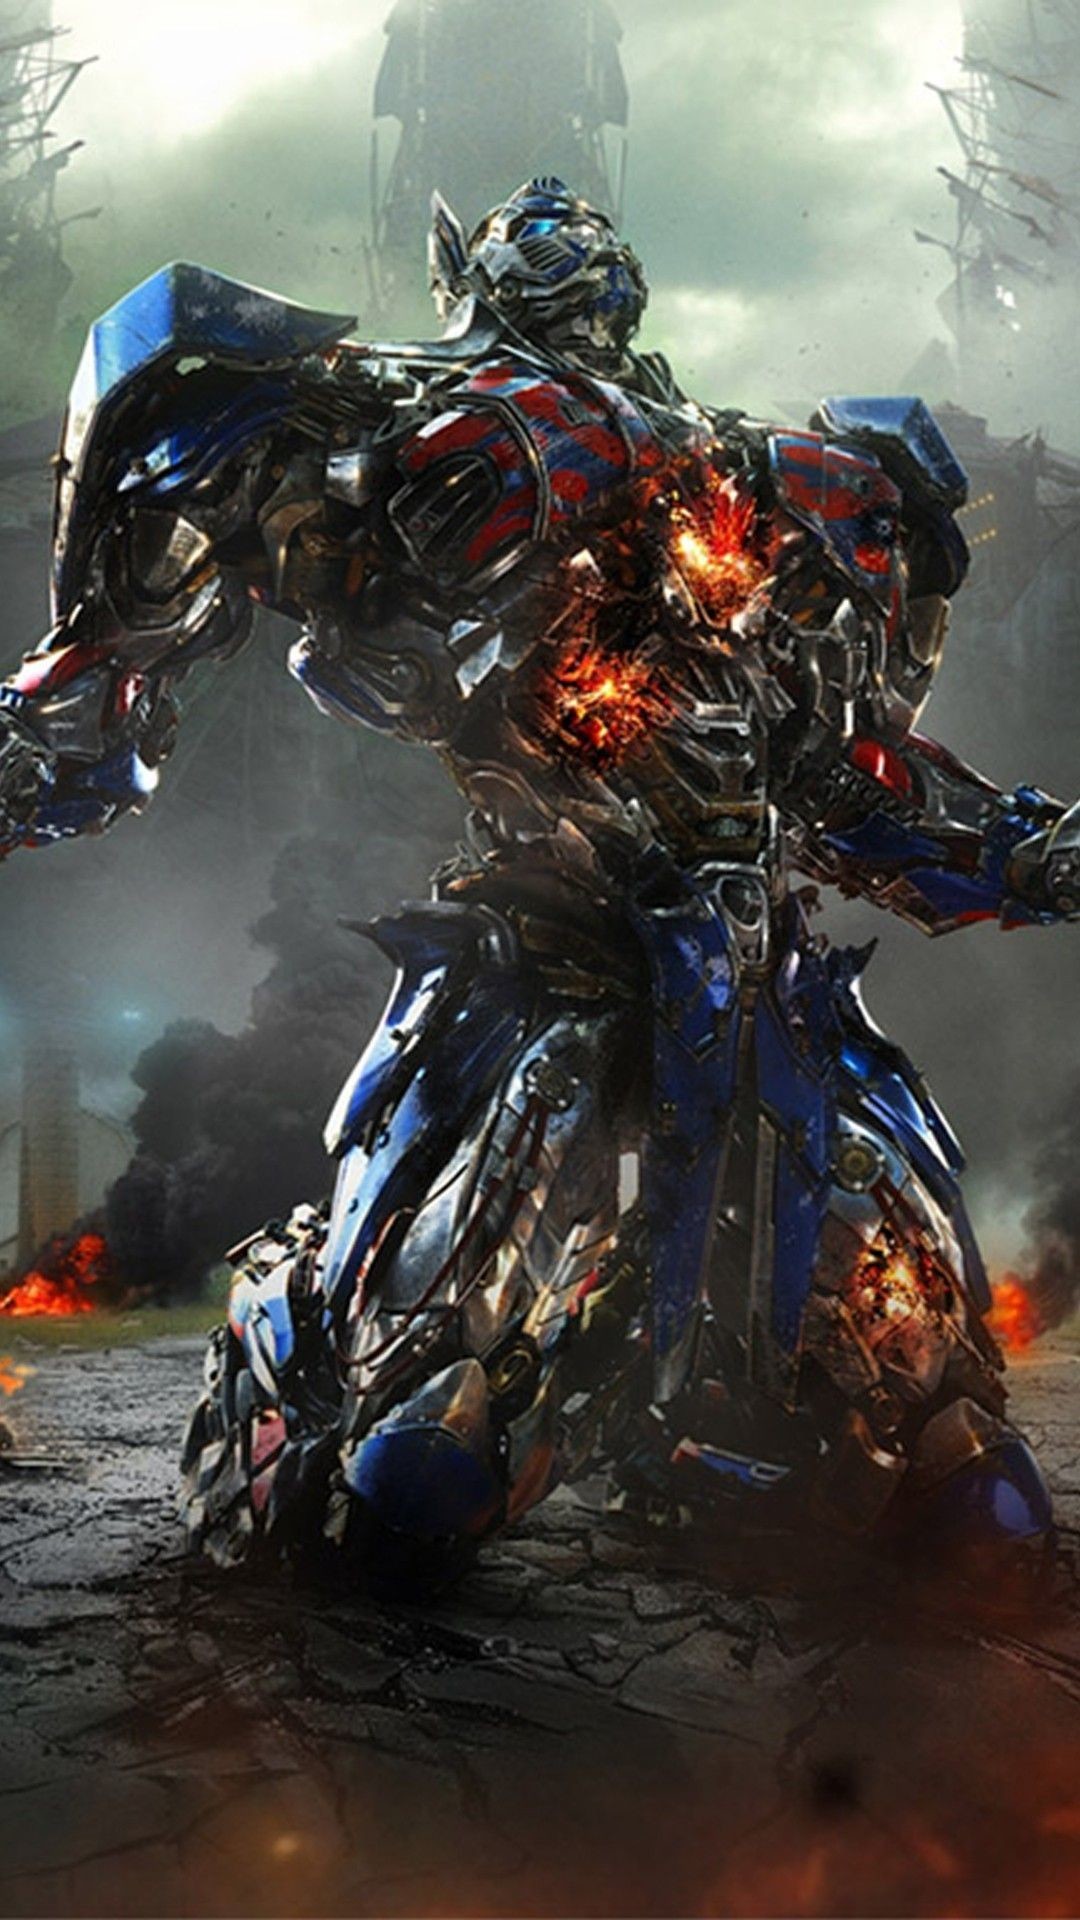 1080x1920  Movies iPhone 6 Plus Wallpapers - Transformers Optimus Prime  Movie iPhone 6 Plus HD Wallpaper #Movies #iPhone #6 #Plus #Wallpapers  #Transformers ...